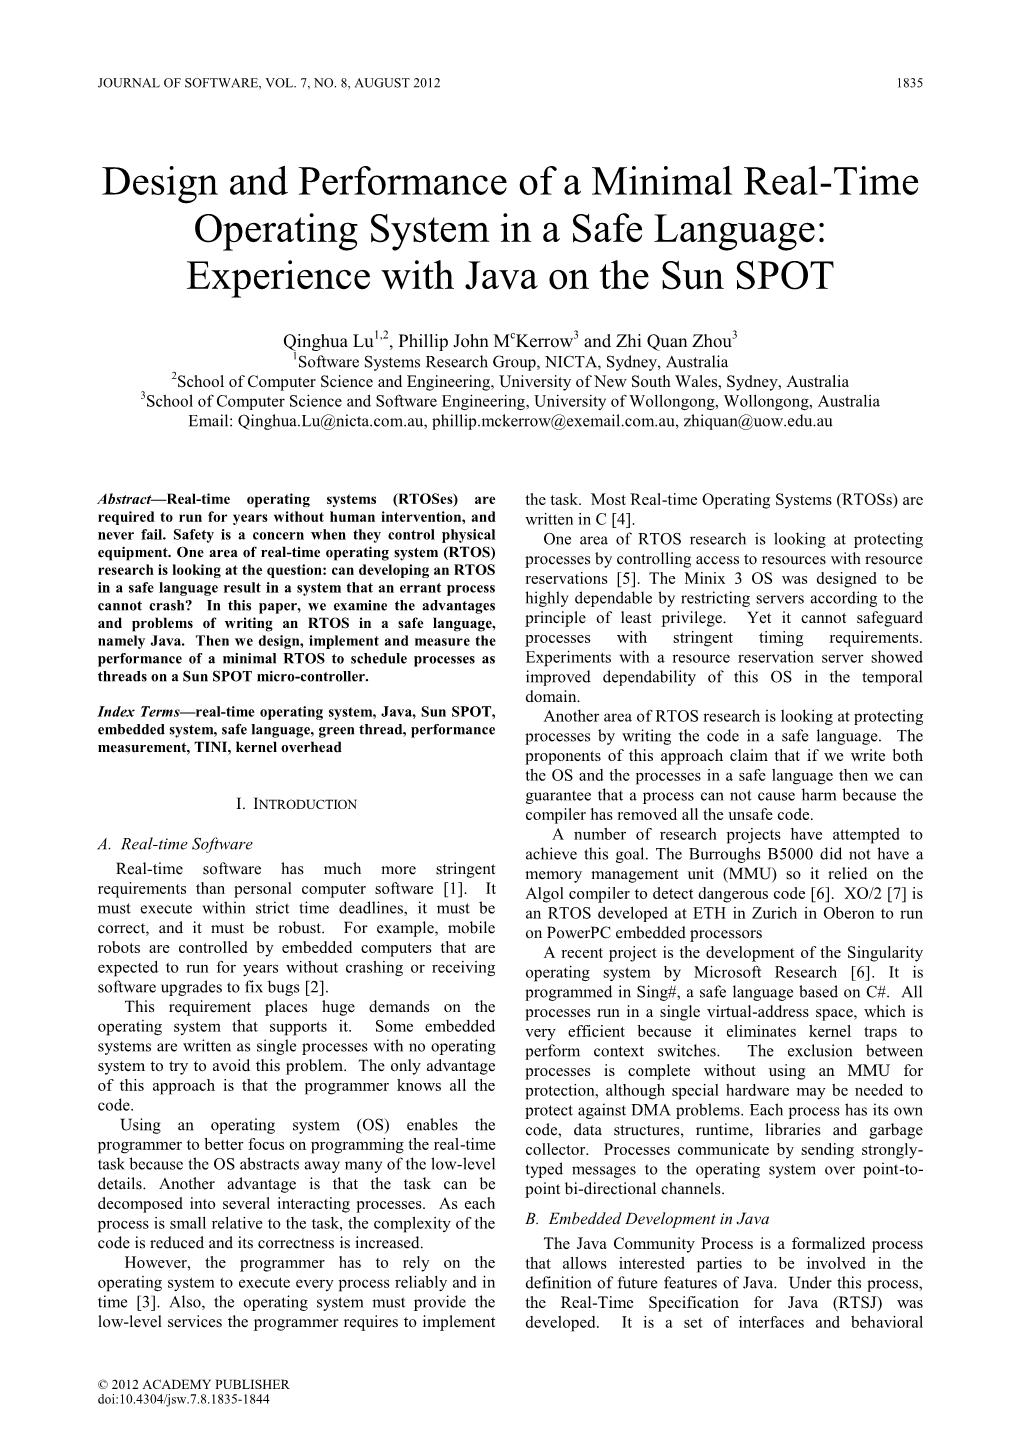 Design and Performance of a Minimal Real-Time Operating System in a Safe Language: Experience with Java on the Sun SPOT